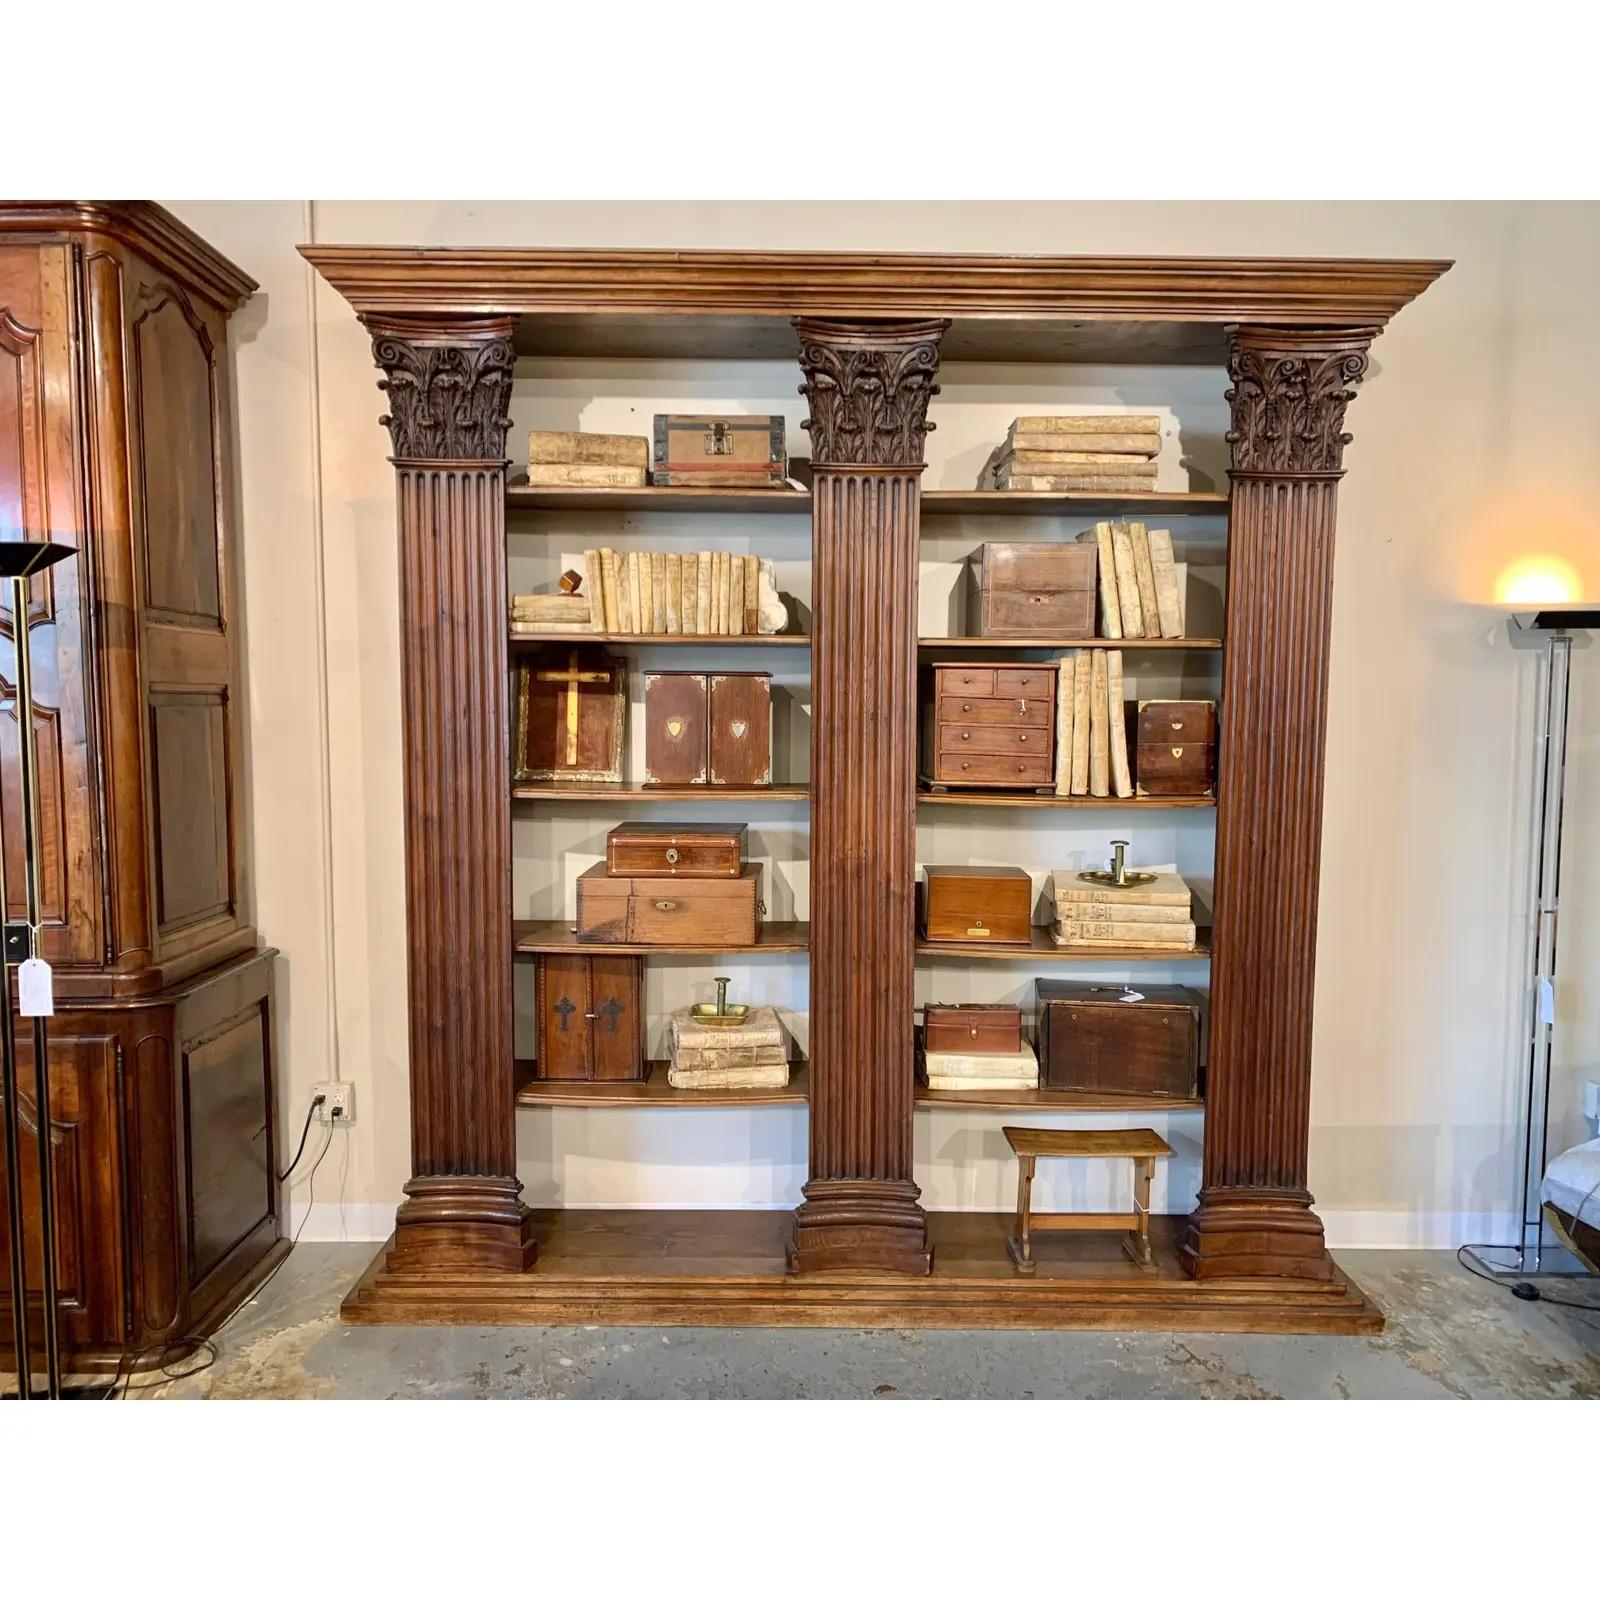 Early 1900s French Walnut Bibliotheque Handcrafted With 18th Century Columns 8